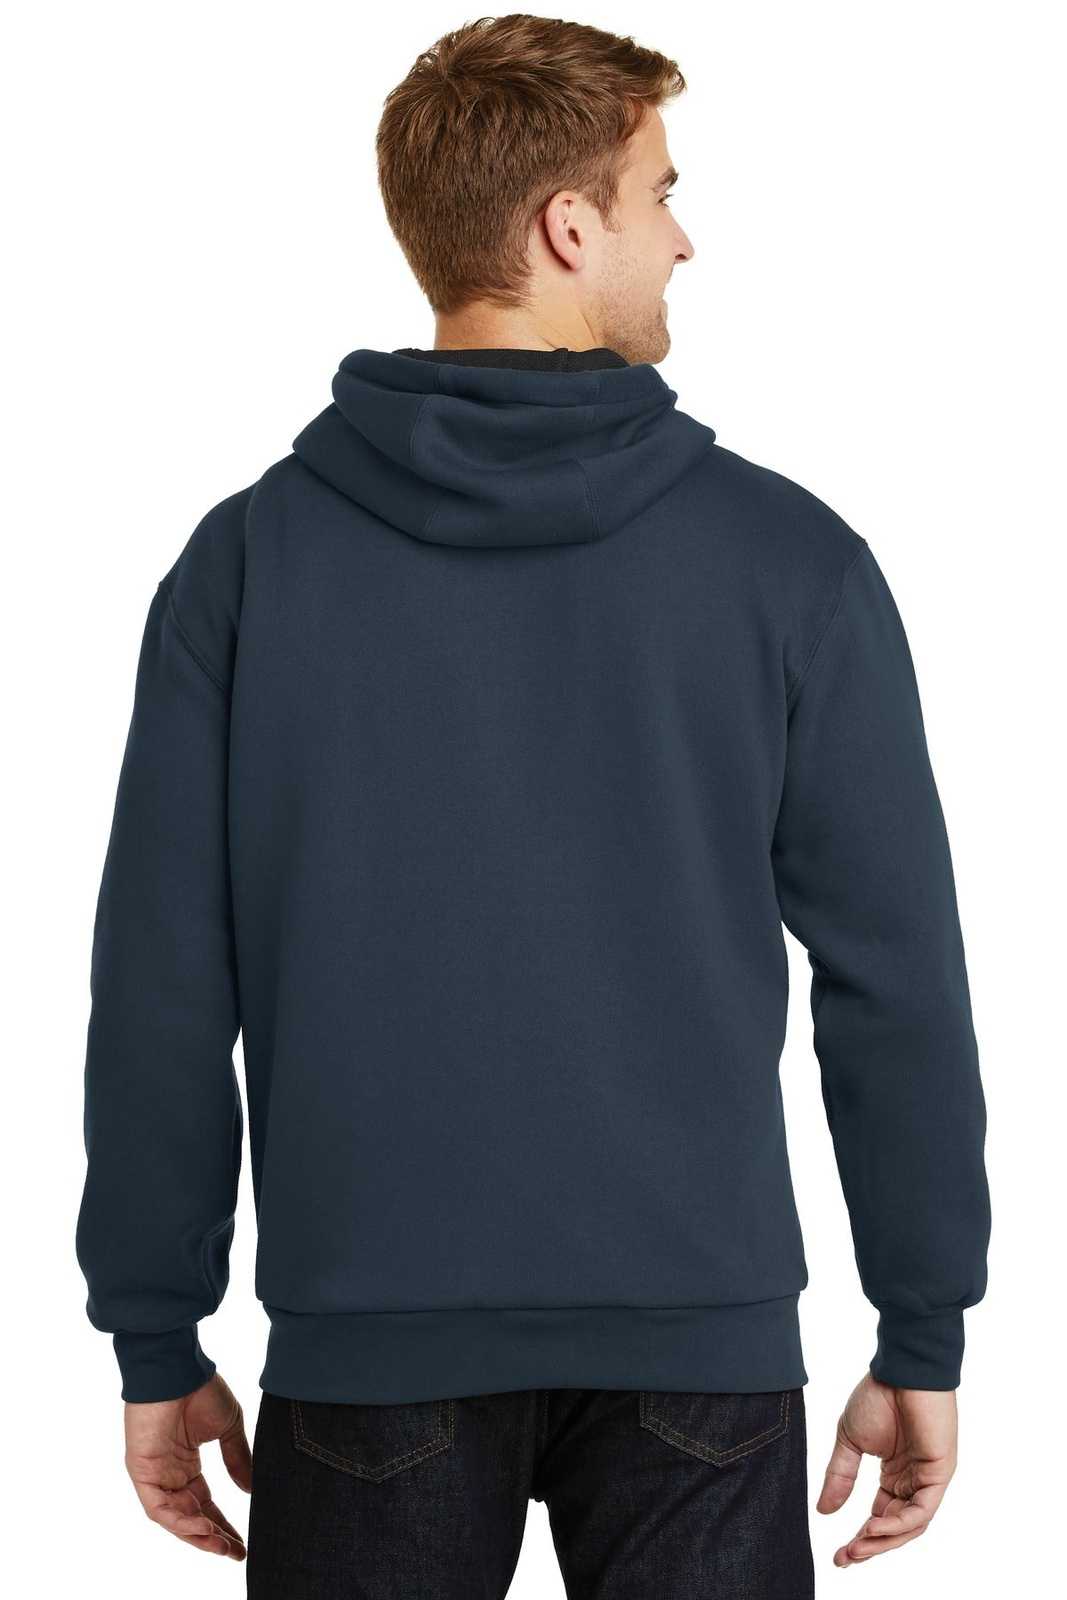 CornerStone CS620 Heavyweight Full-Zip Hooded Sweatshirt with Thermal Lining - Navy - HIT a Double - 2